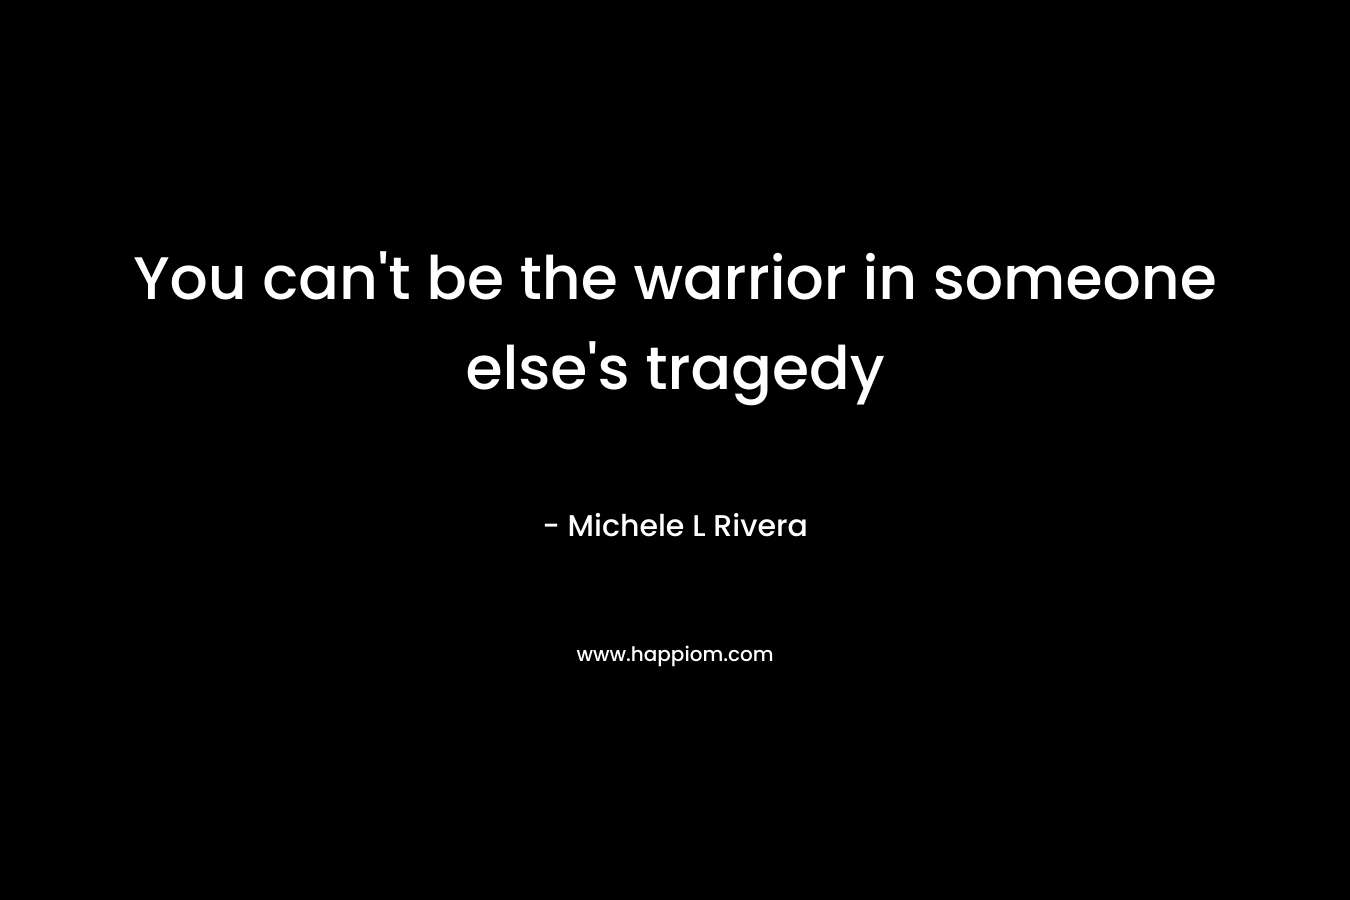 You can't be the warrior in someone else's tragedy